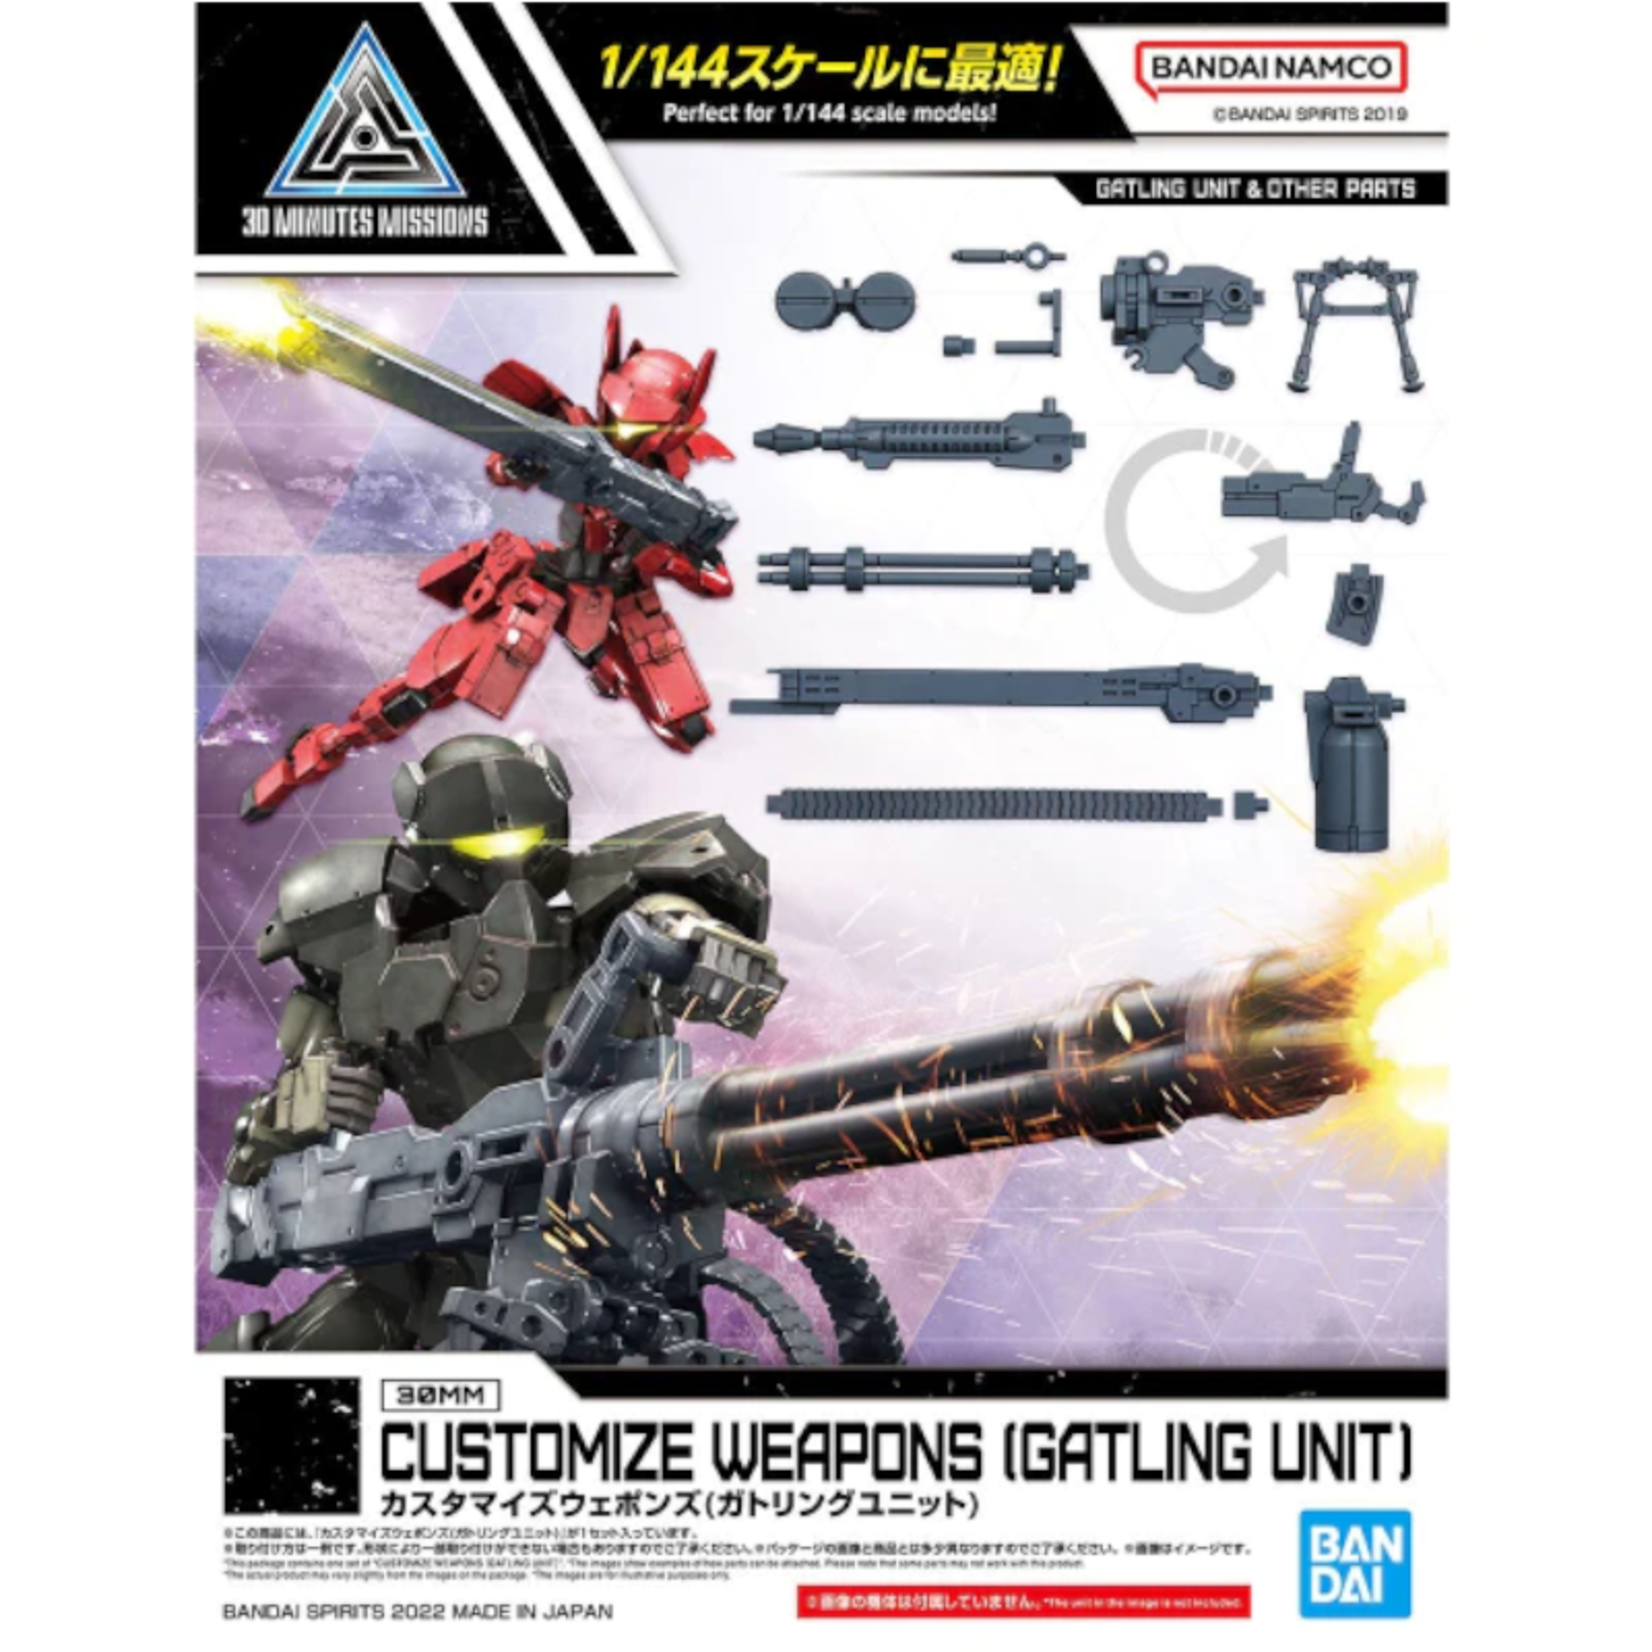 BANDAI 30MM 1/144 W-20 CUSTOMIZE WEAPONS (MILITARY WEAPON)